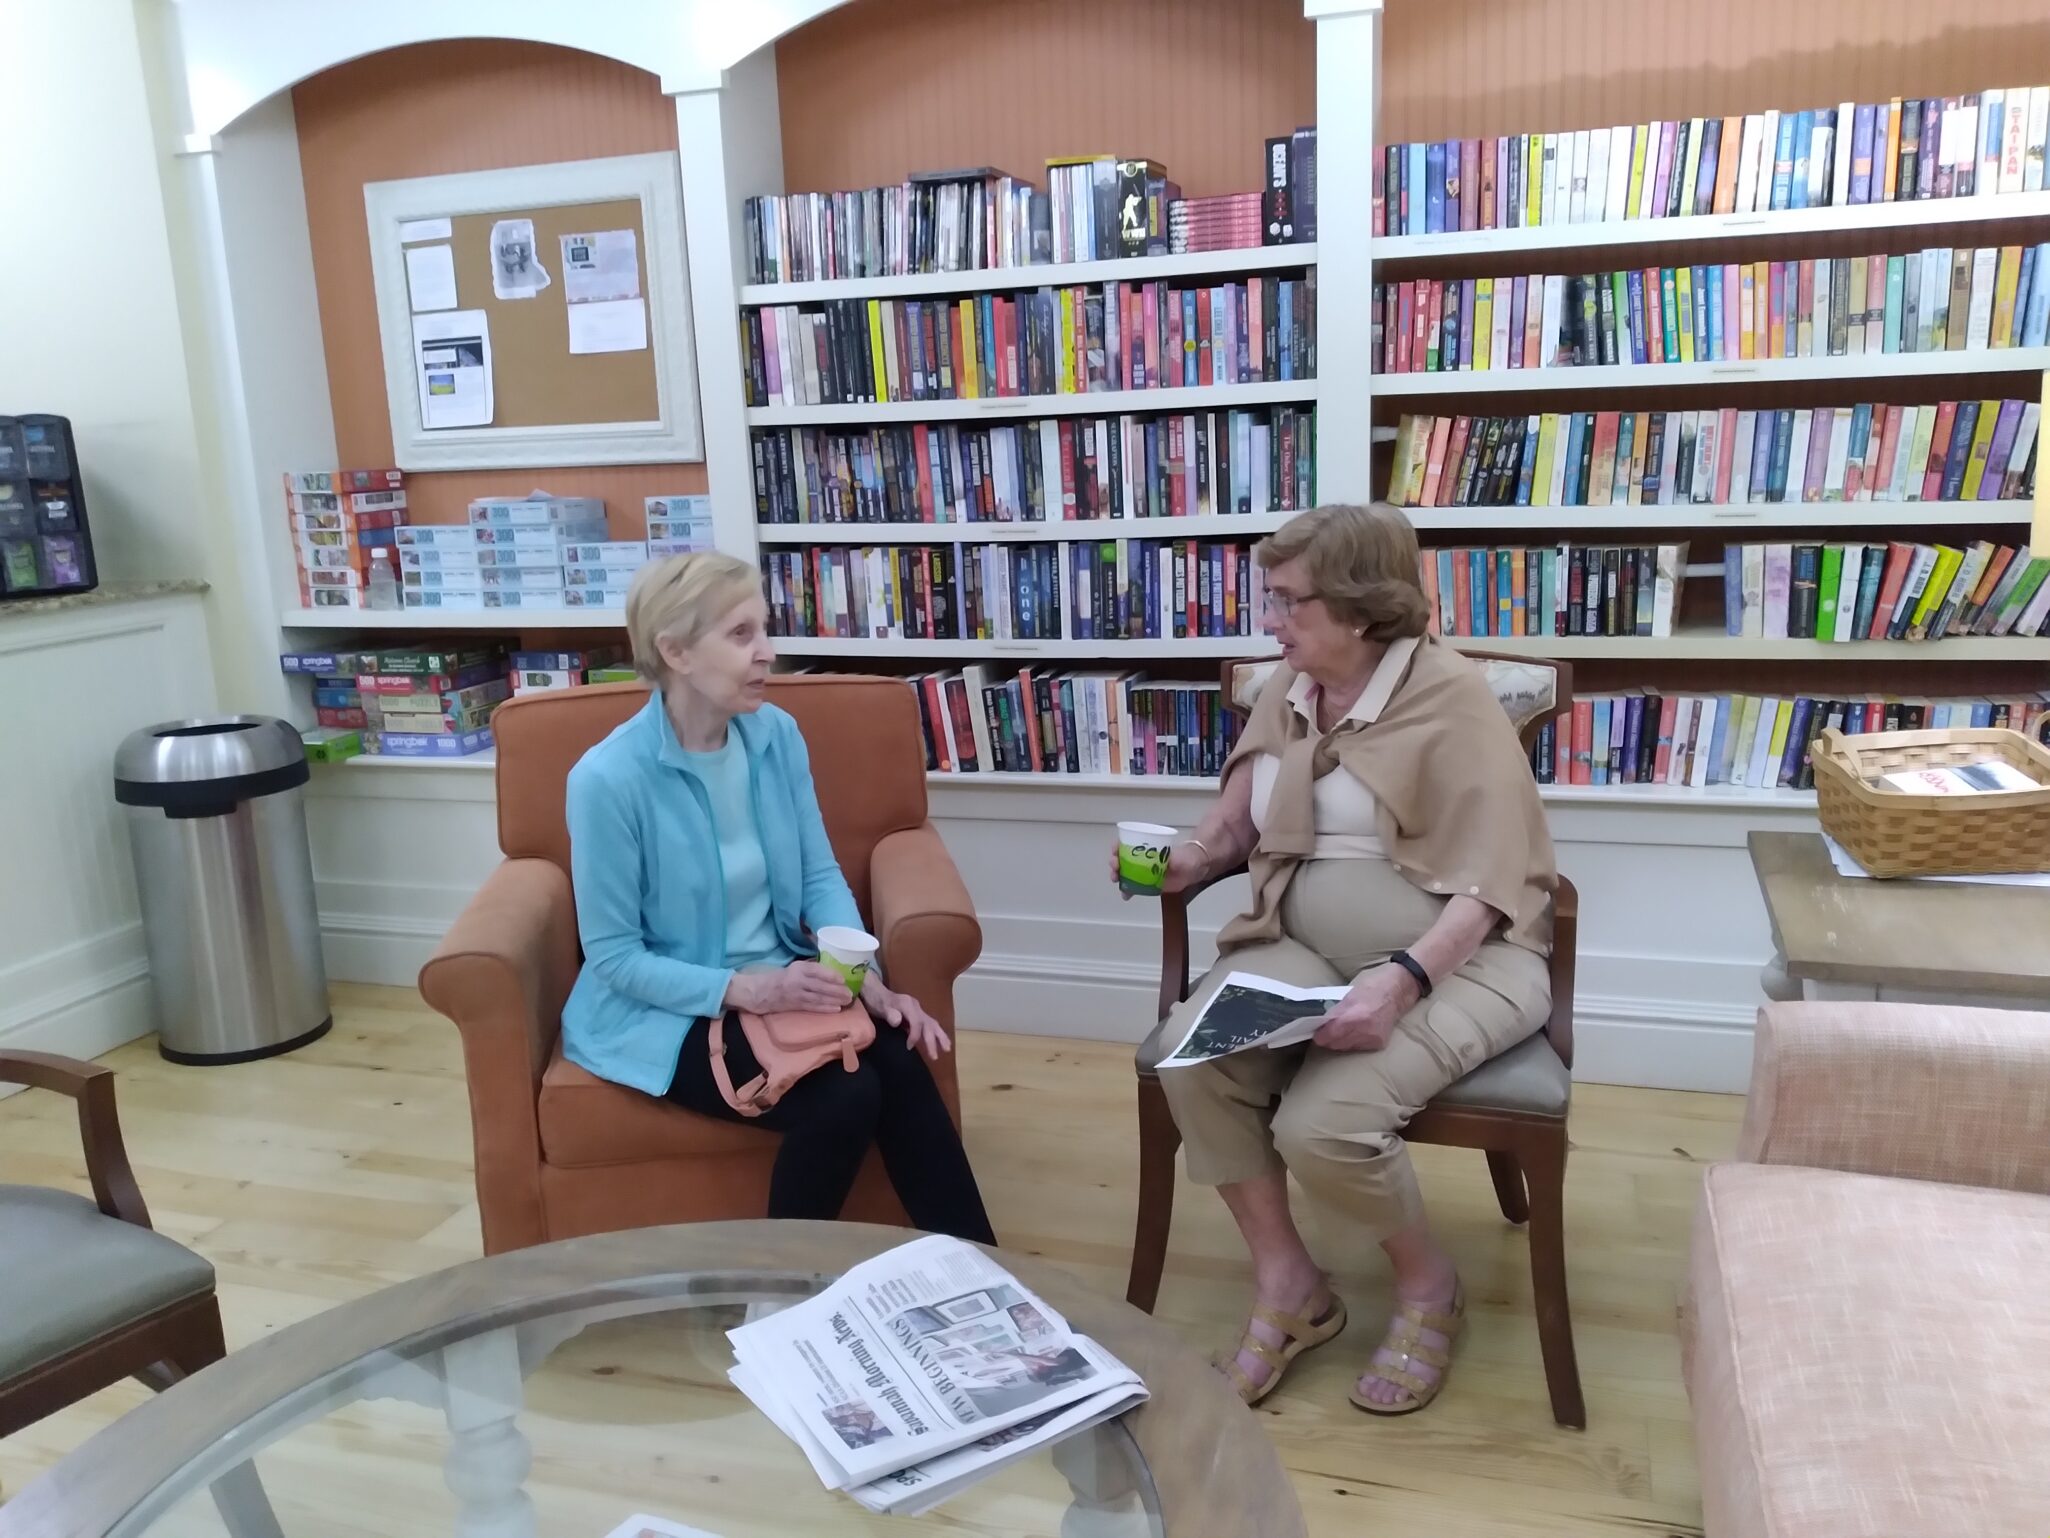 Two women sitting in chairs in front of a bookcase.